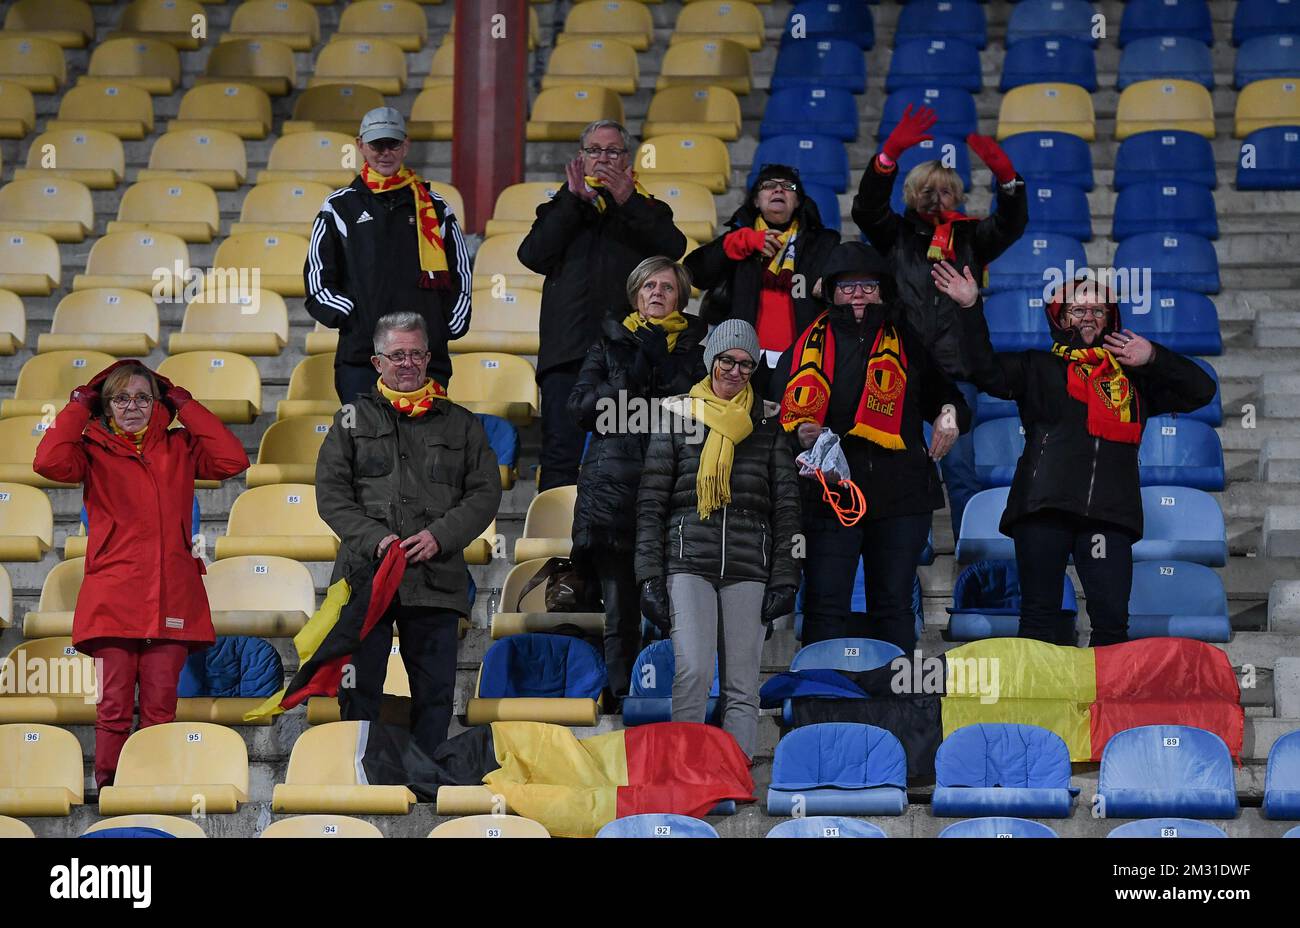 Belgian fans and supporters pictured during a soccer game between Croatia and Belgium's Red Flames, Friday 08 November 2019 in Zapresic, Croatia, the third out of 8 qualification games for the women's Euro 2021 European Championships. BELGA PHOTO DAVID CATRY Stock Photo